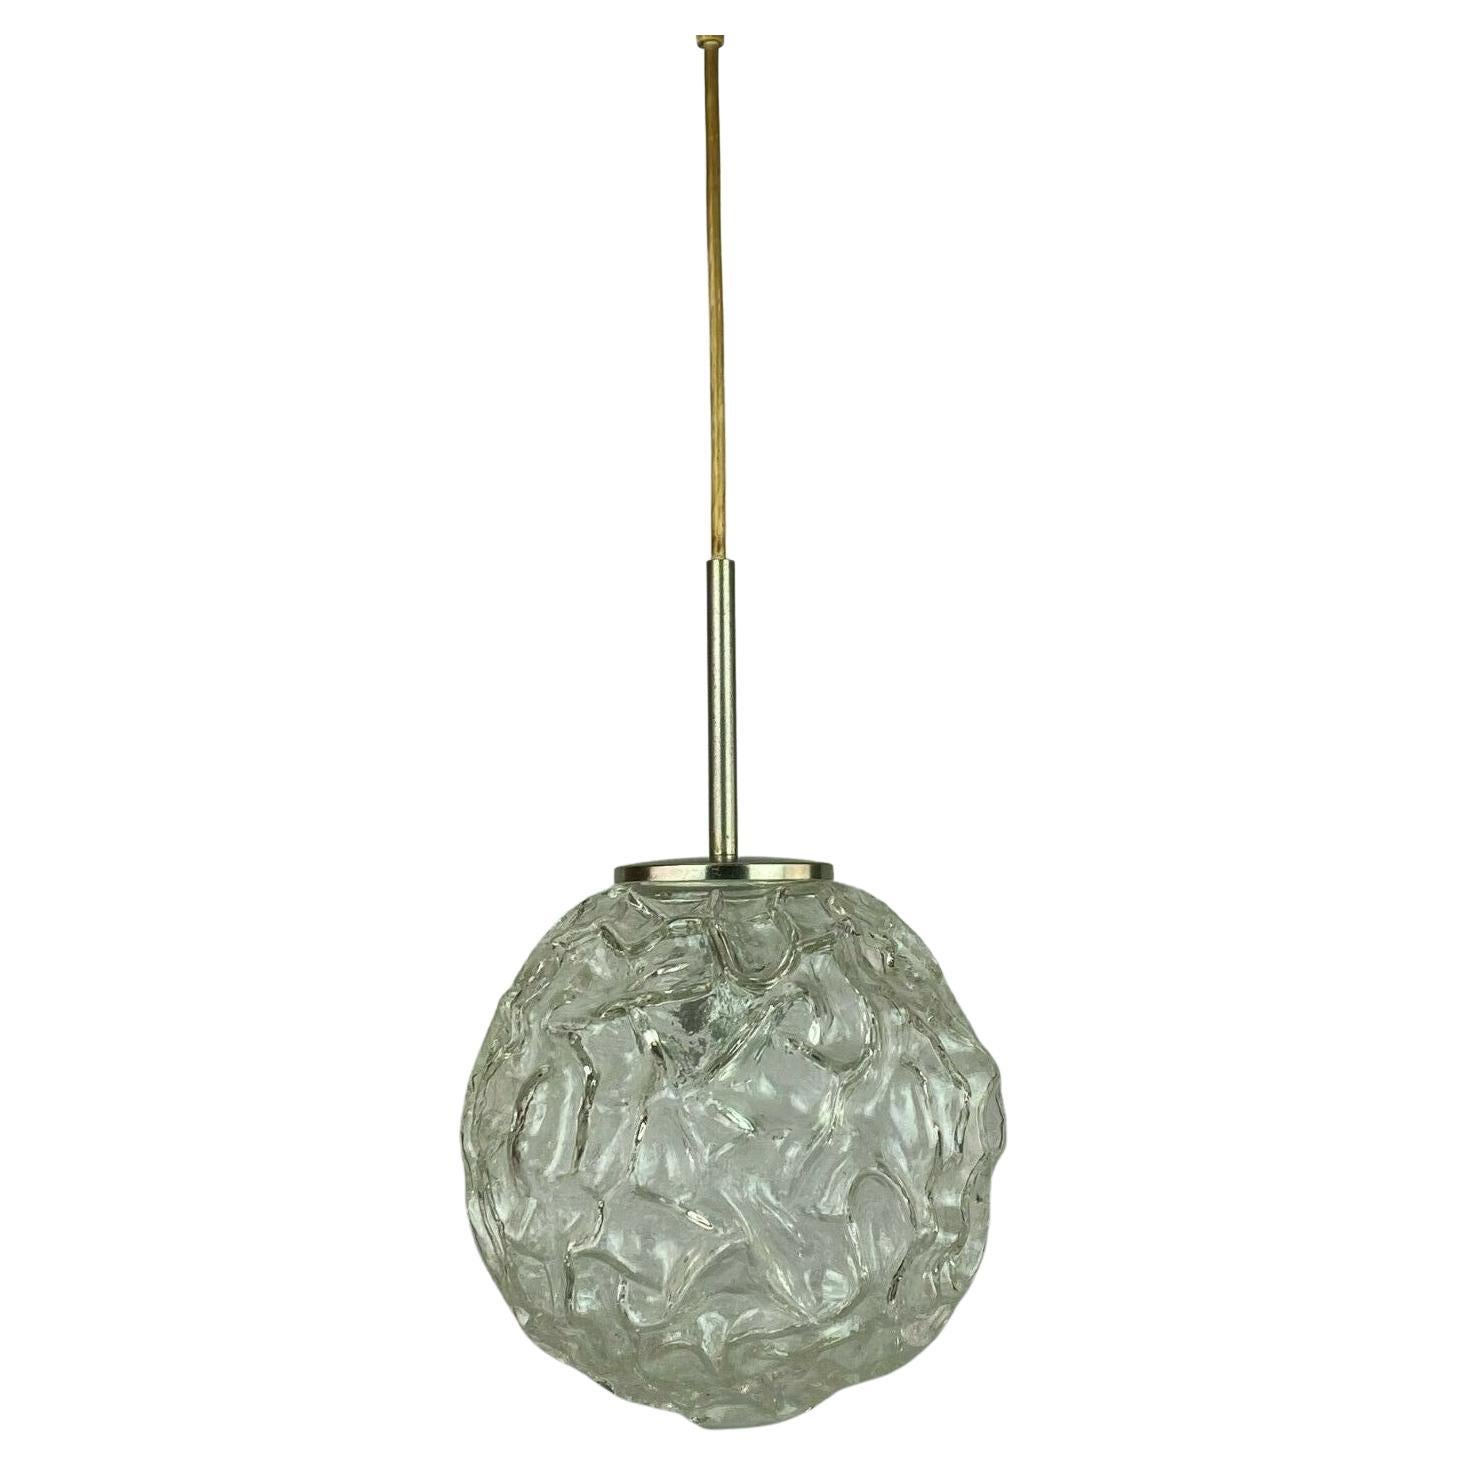 60s 70s Lamp Light Ceiling Lamp Hanging Lamp Hillebrand Glass Space Age Design For Sale